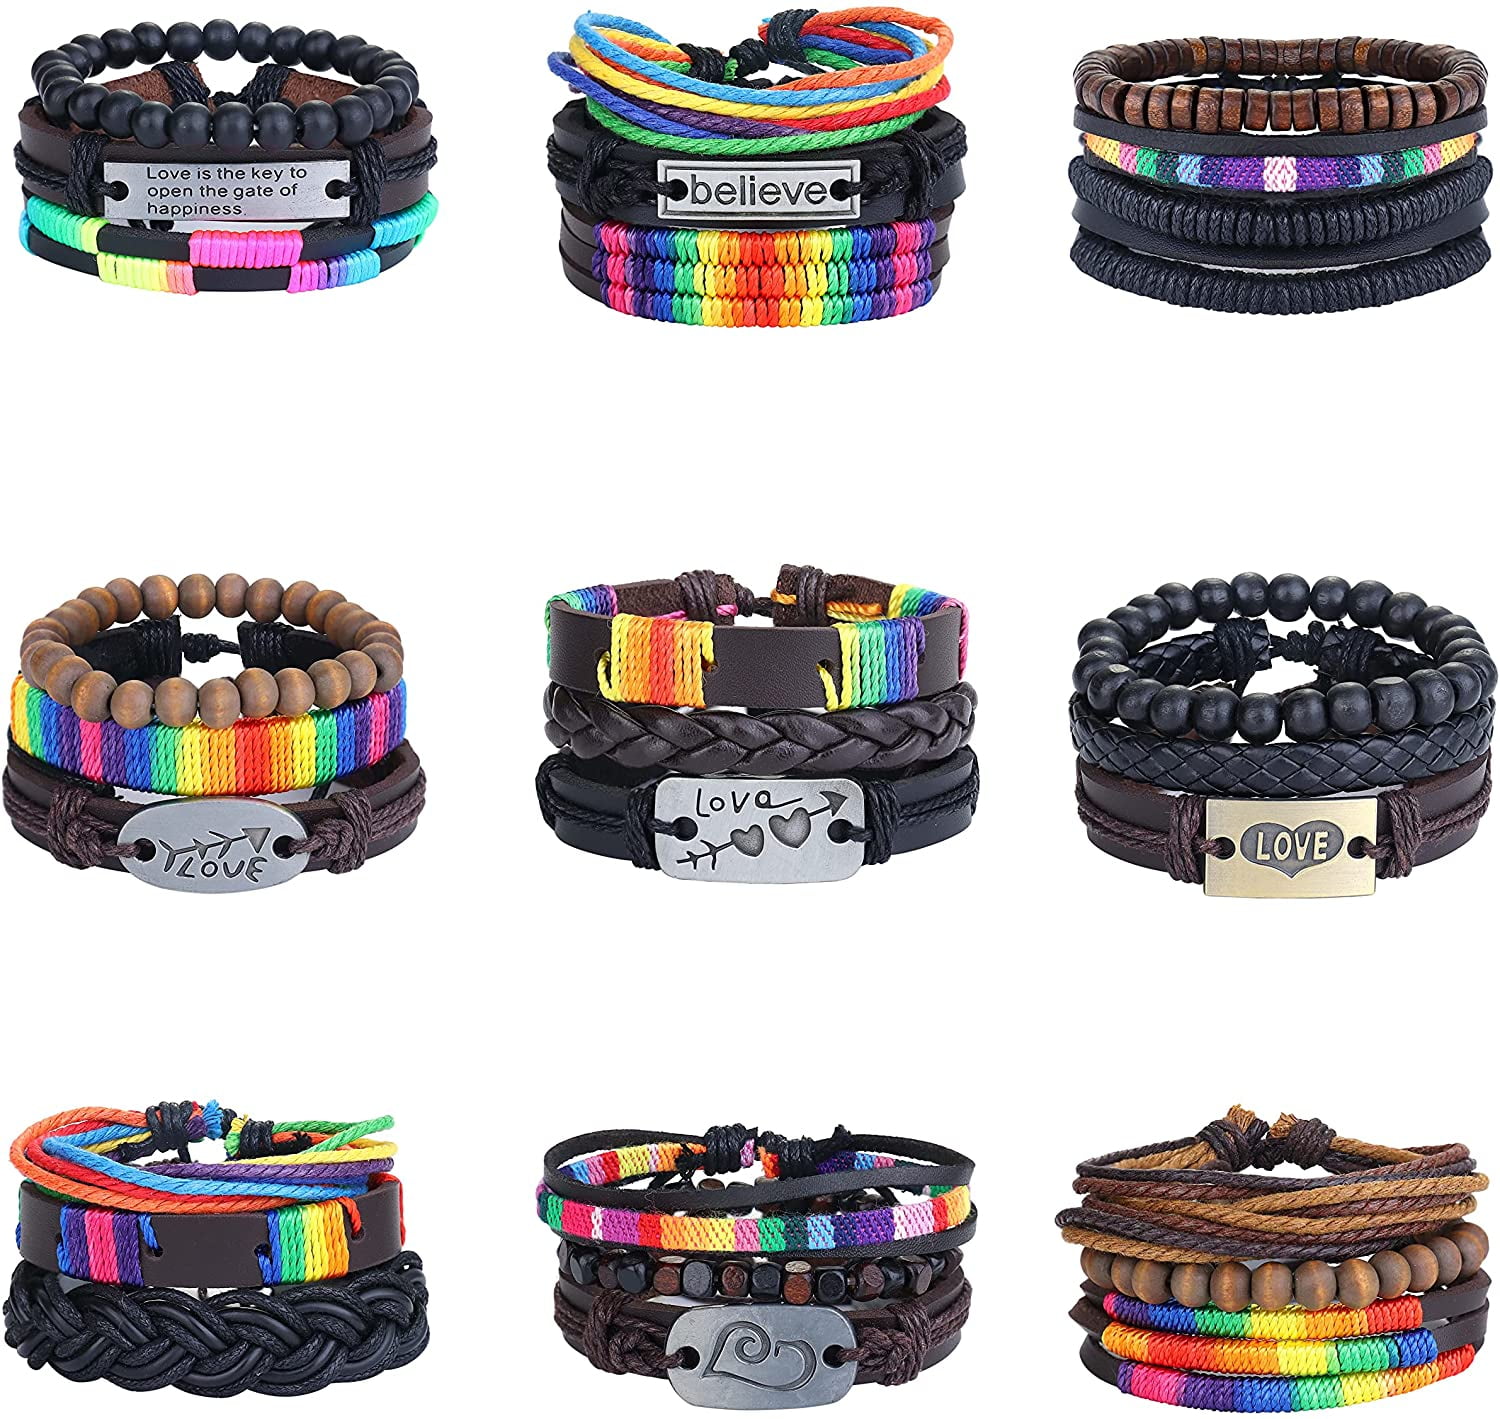 Jstyle 27Pcs Gay Pride Bracelet LGBTQ Accessories Gay Pride Stuff Jewelry  Adjustable LGBT Gay Couple Rainbow Bracelets Gay Gifts for Men Women  Fashion